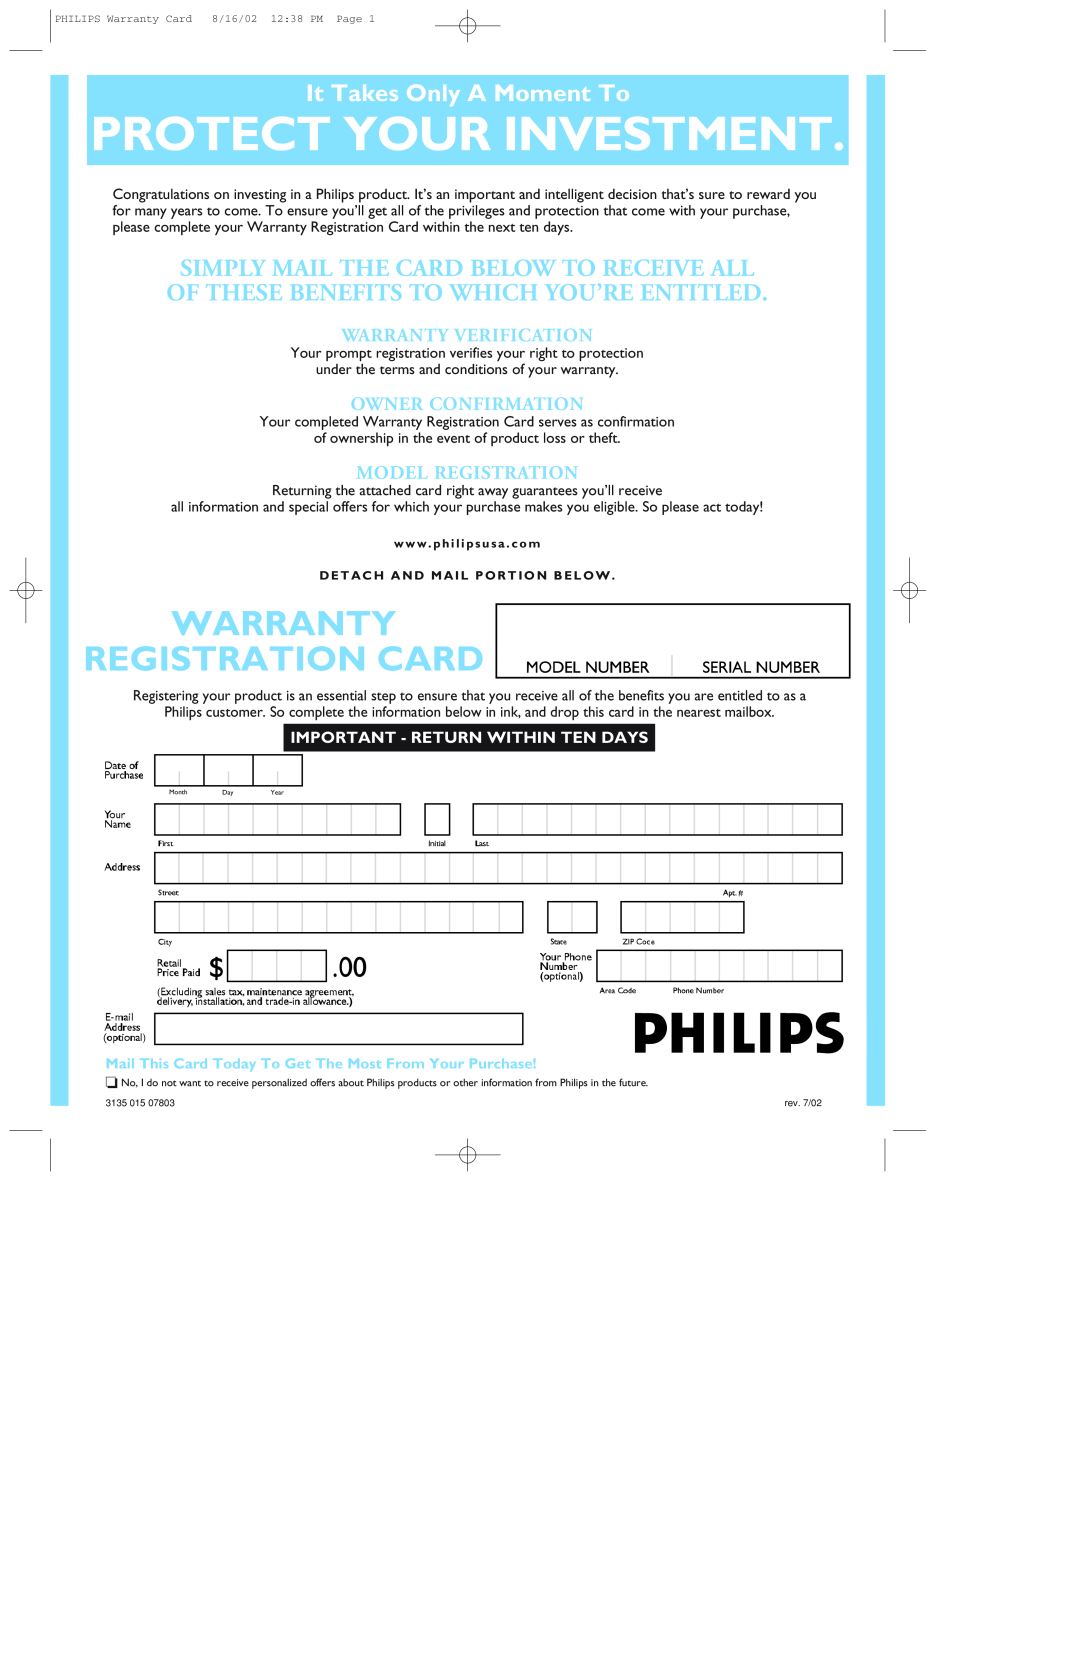 Philips 107G Protect Your Investment, Warranty Registration Card, It Takes Only A Moment To, Warranty Verification 